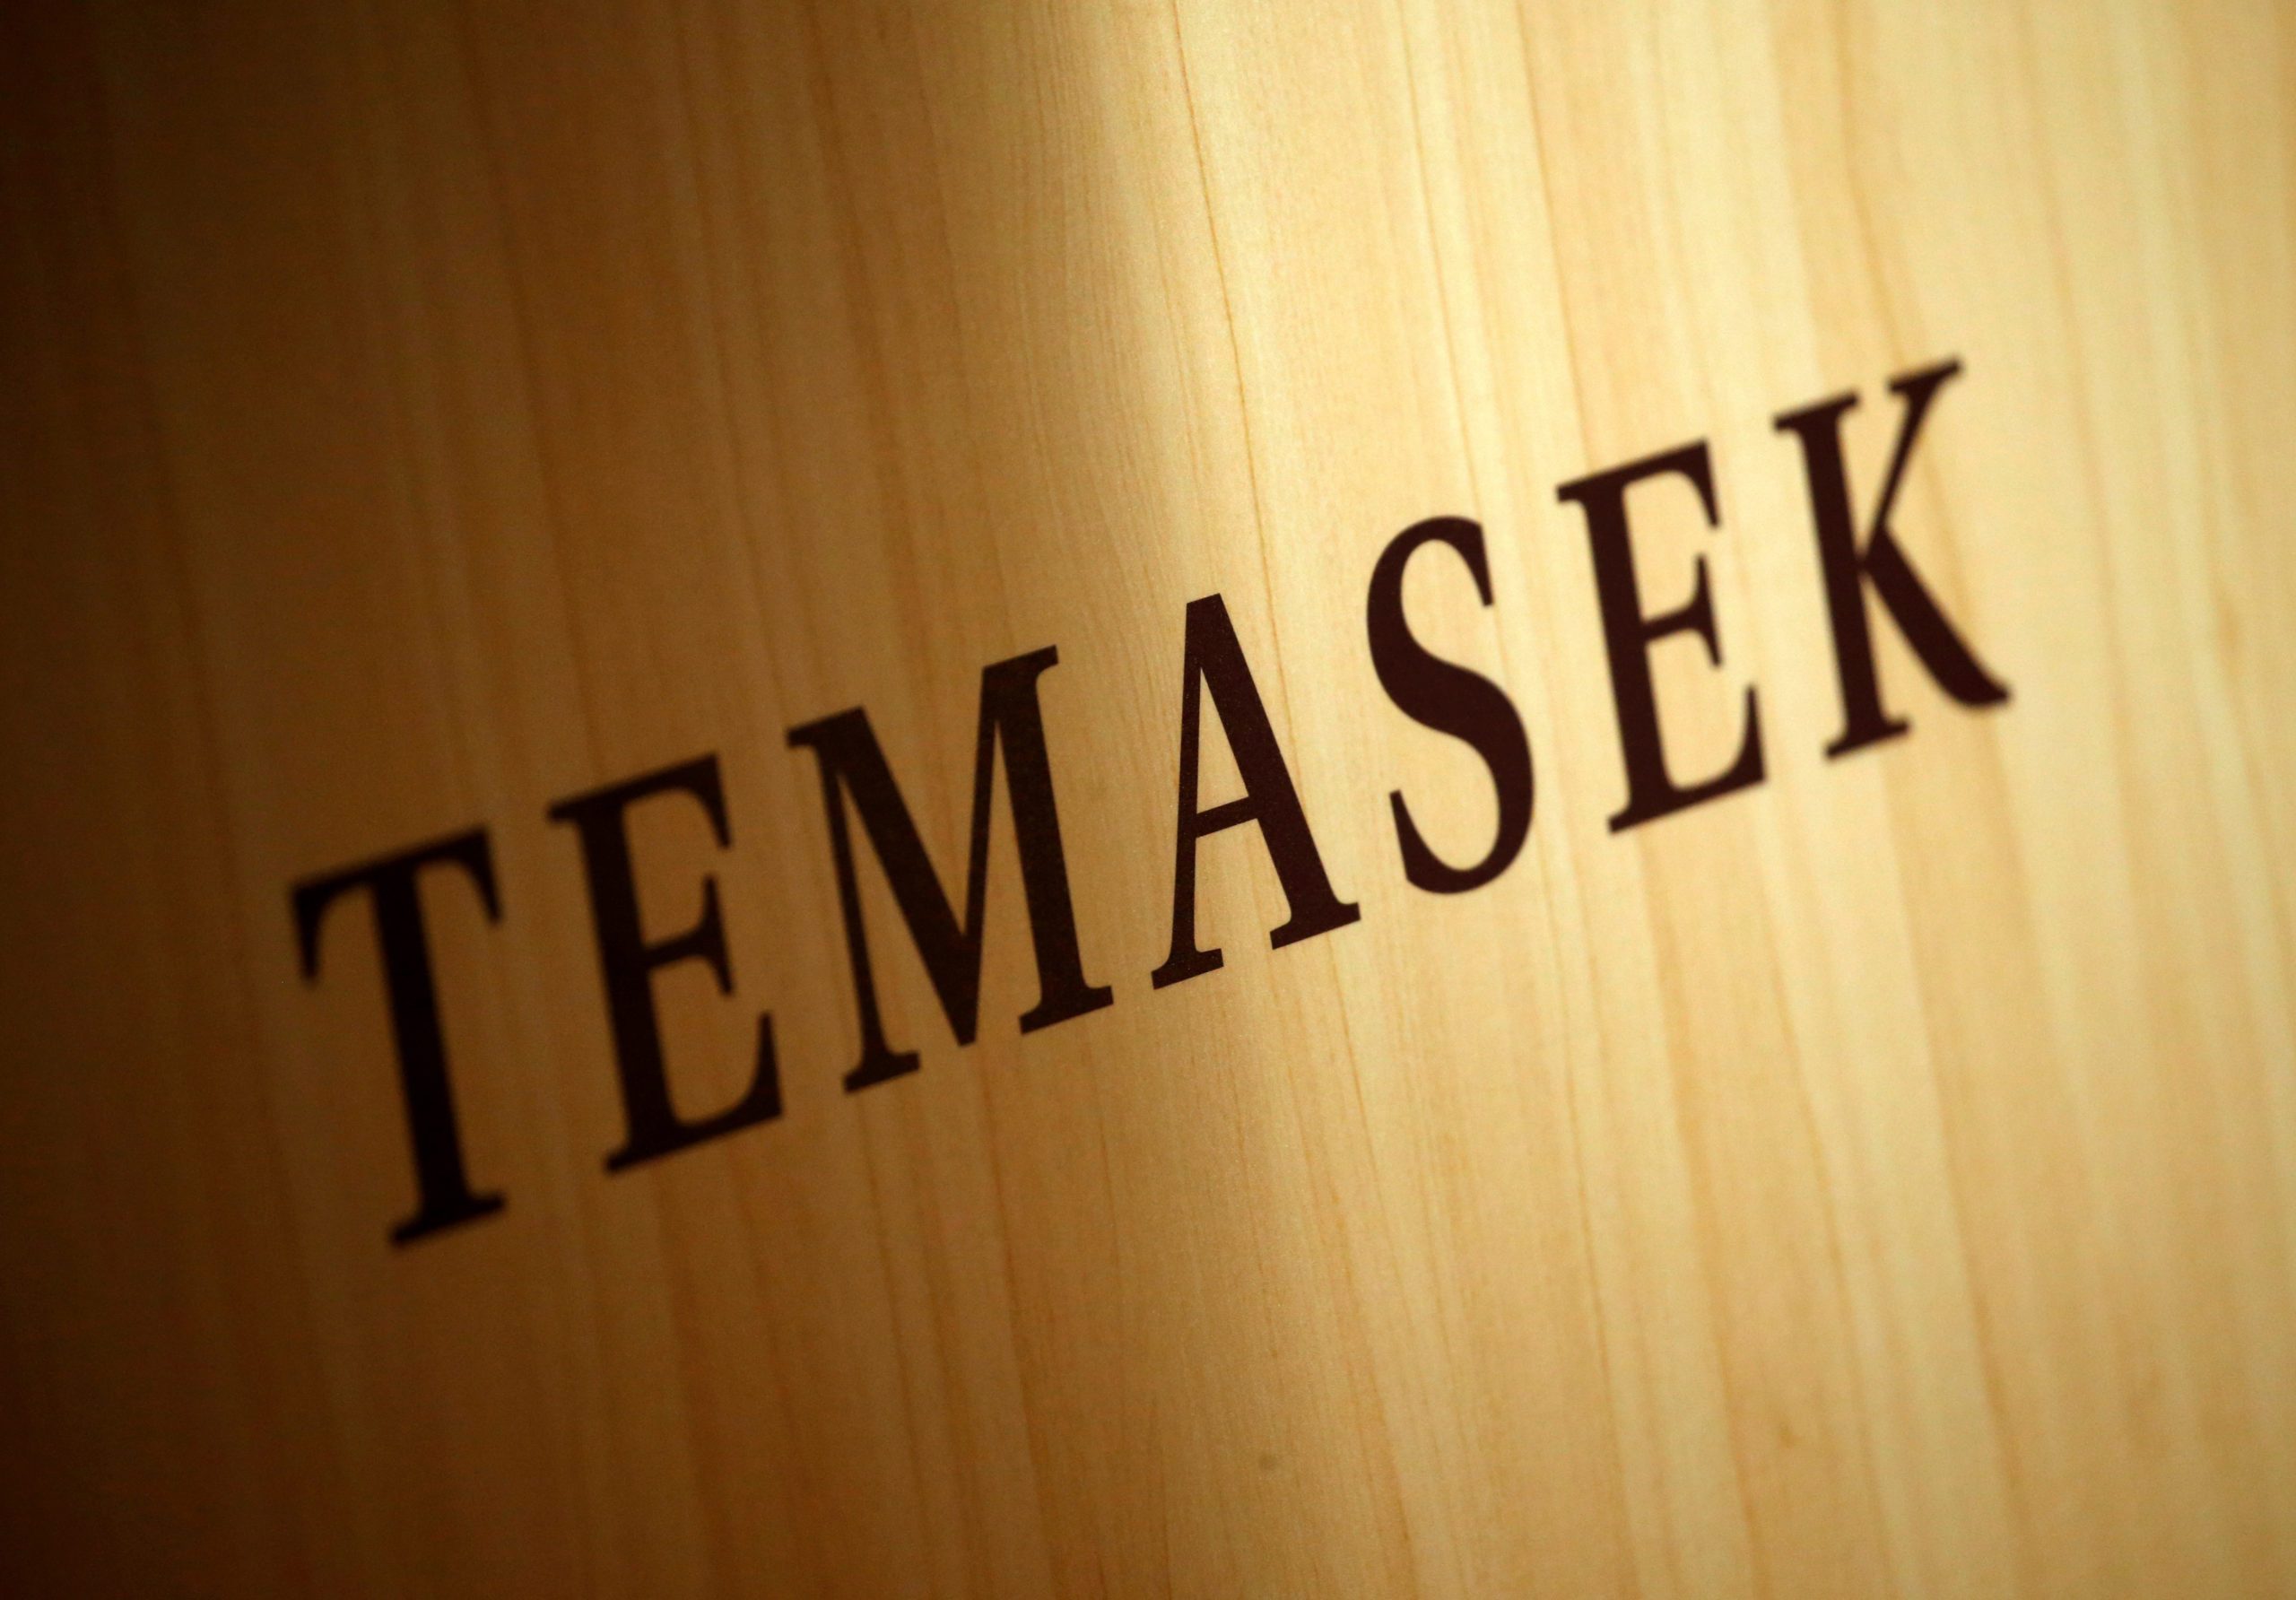 Temasek expects digitisation and sustainable living to emerge as megatrends